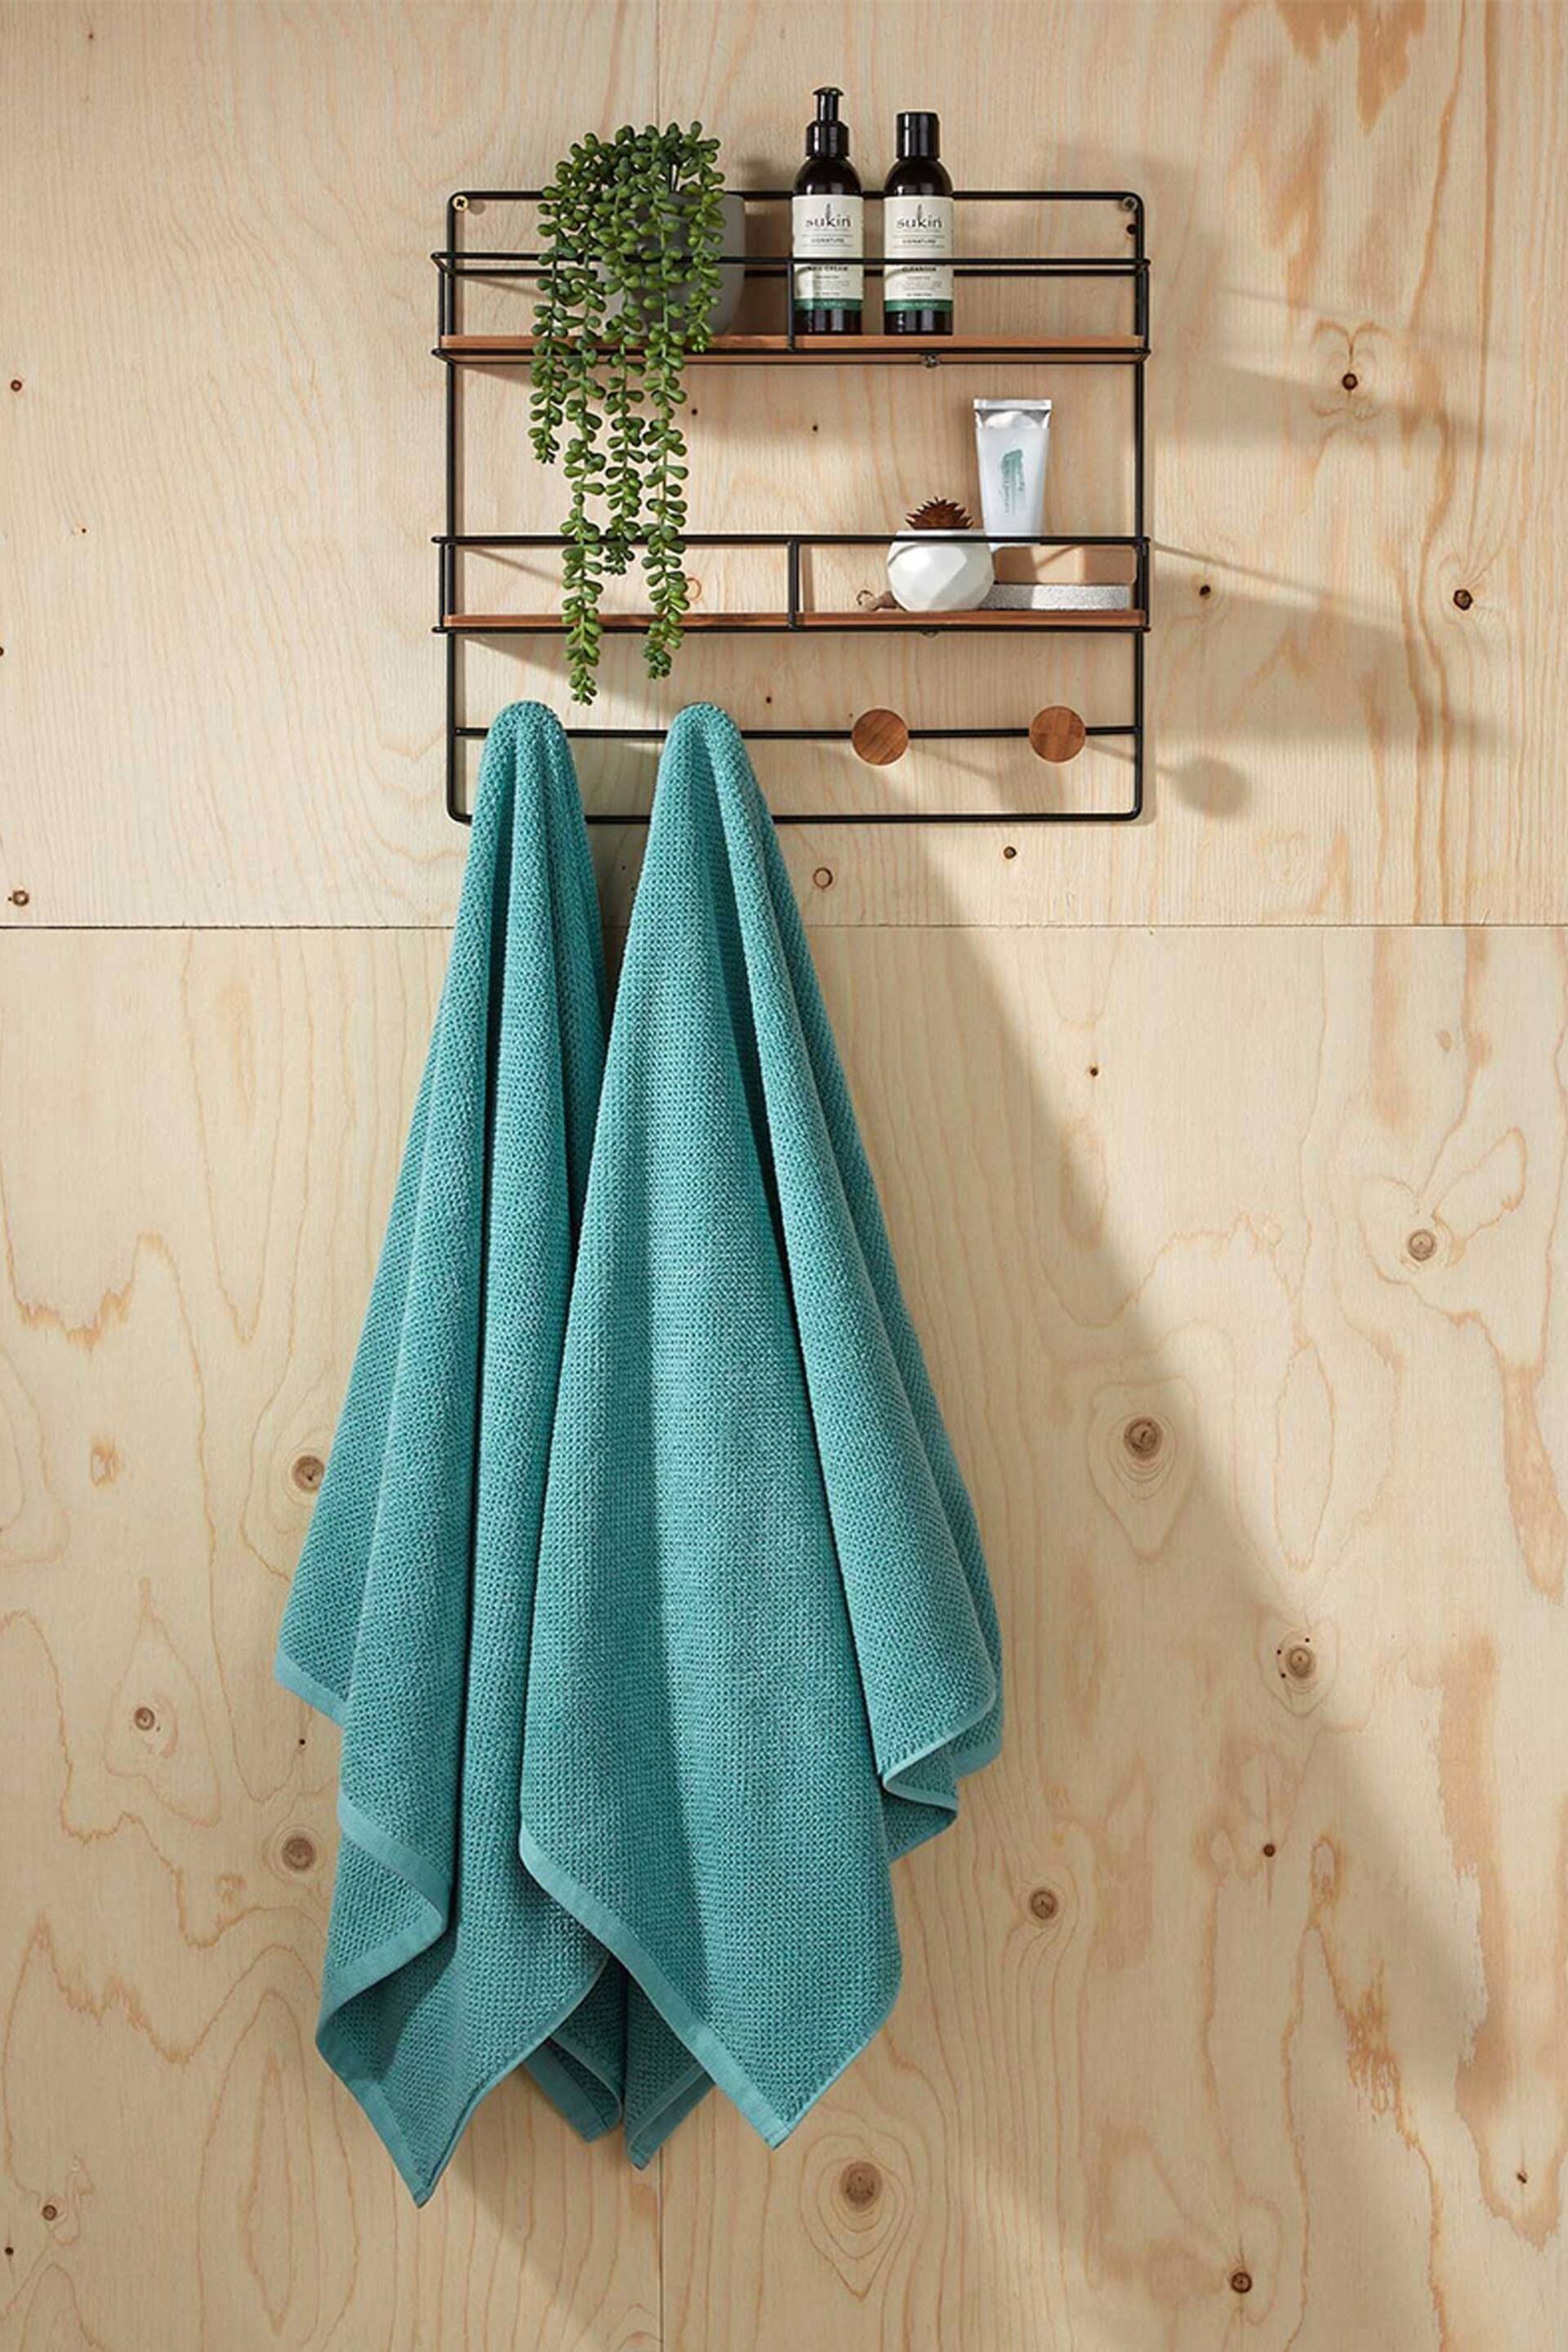 Christy Green Brixton - 600 GSM Cotton Textured Bath Towel - Image 1 of 4